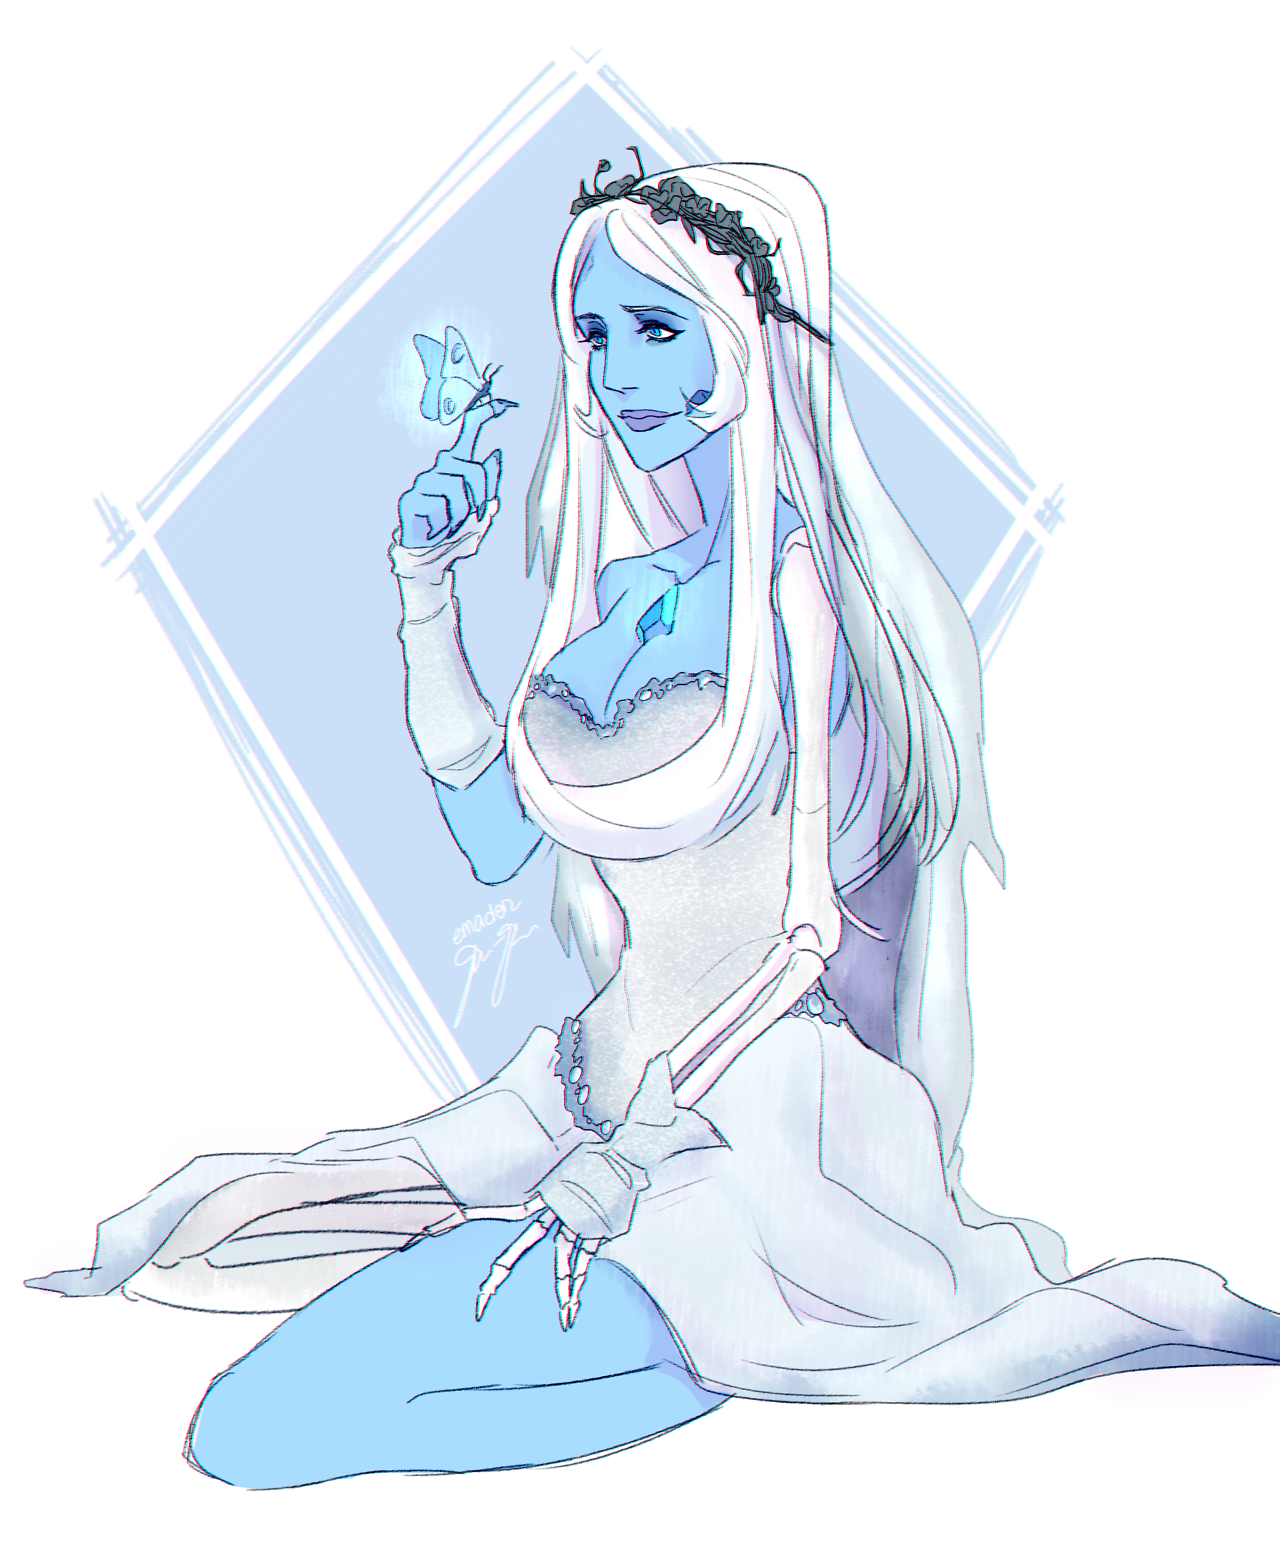 The moment I saw Blue I knew she resembled someone…so here’s a corpse Blue diamond bride to celebrate halloween~! (gawd I have so much mixed feelings for that movie *applause to Tim~*….but I don’t...